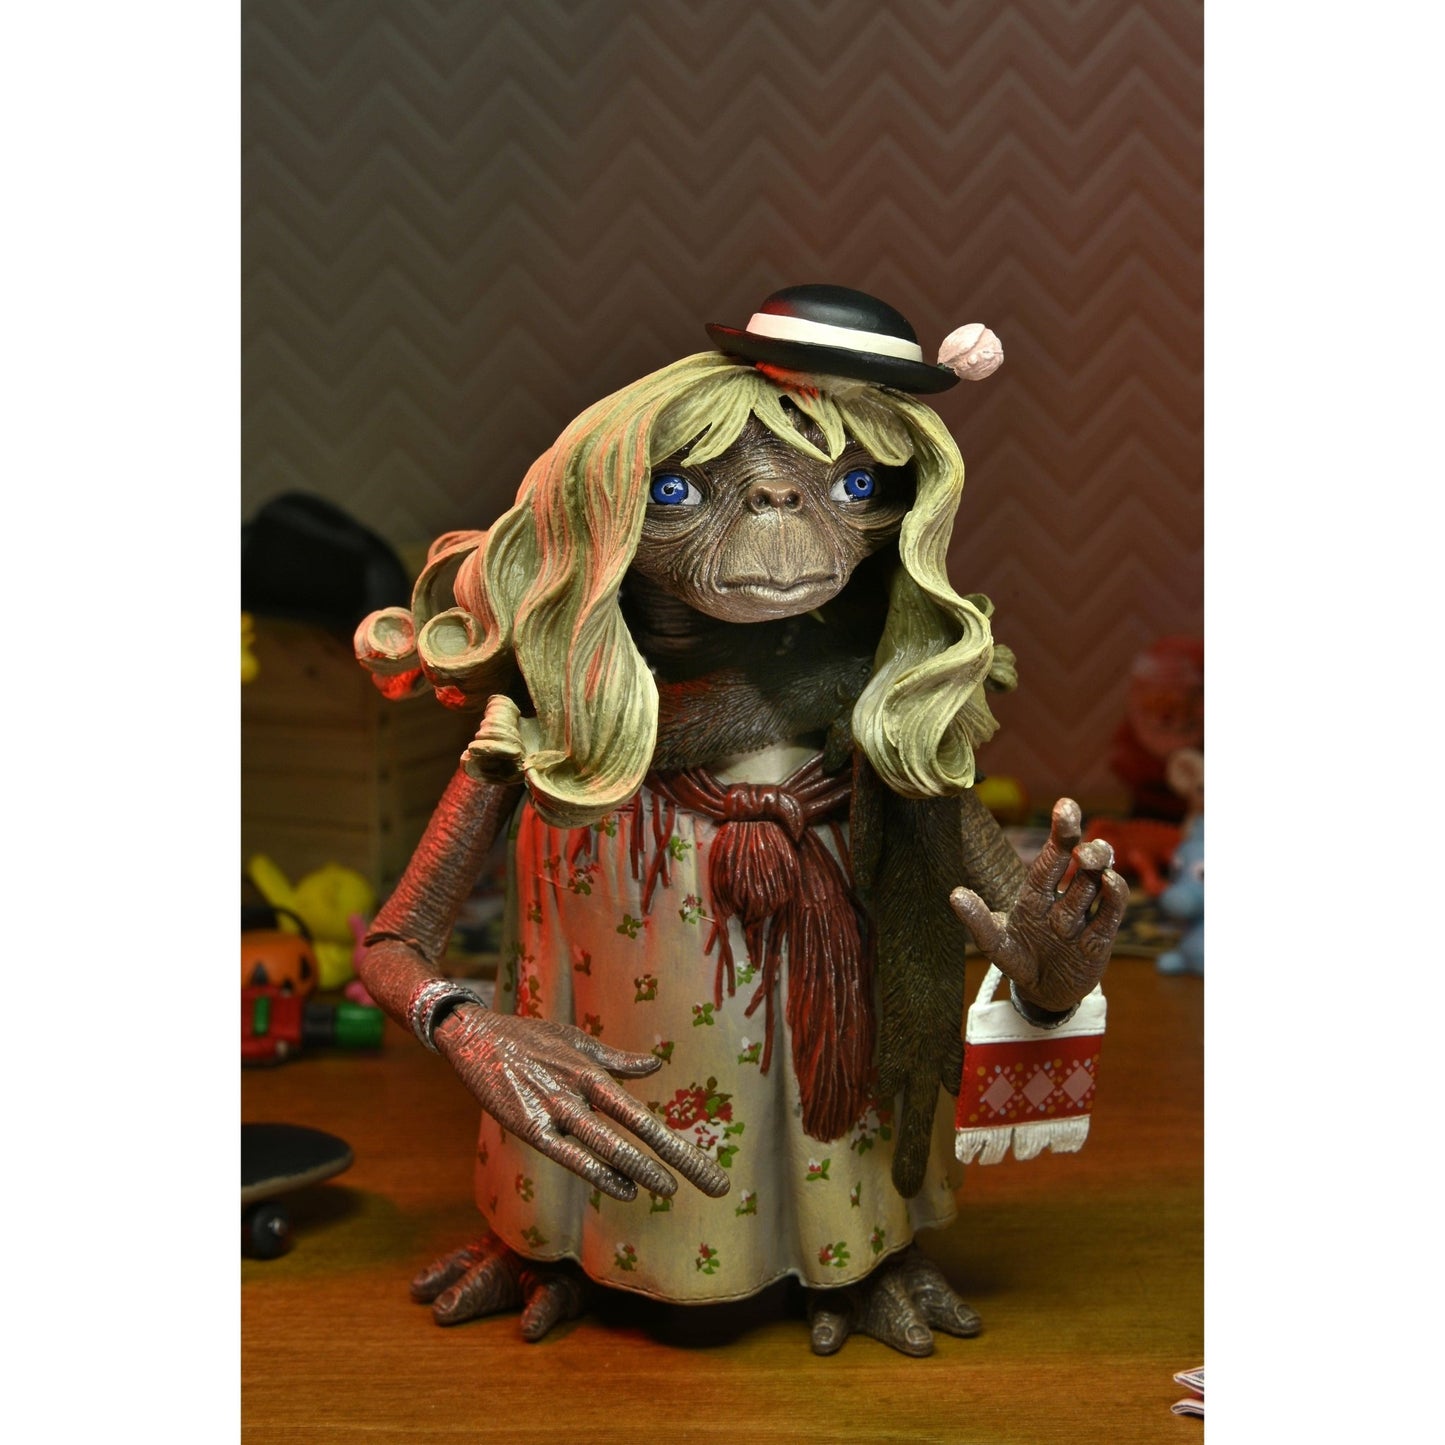 NECA E.T. The Extra Terrestrial Ultimate 7 Inch Action Figure Dress Up 40th Anniversary - Redshift7toys.com